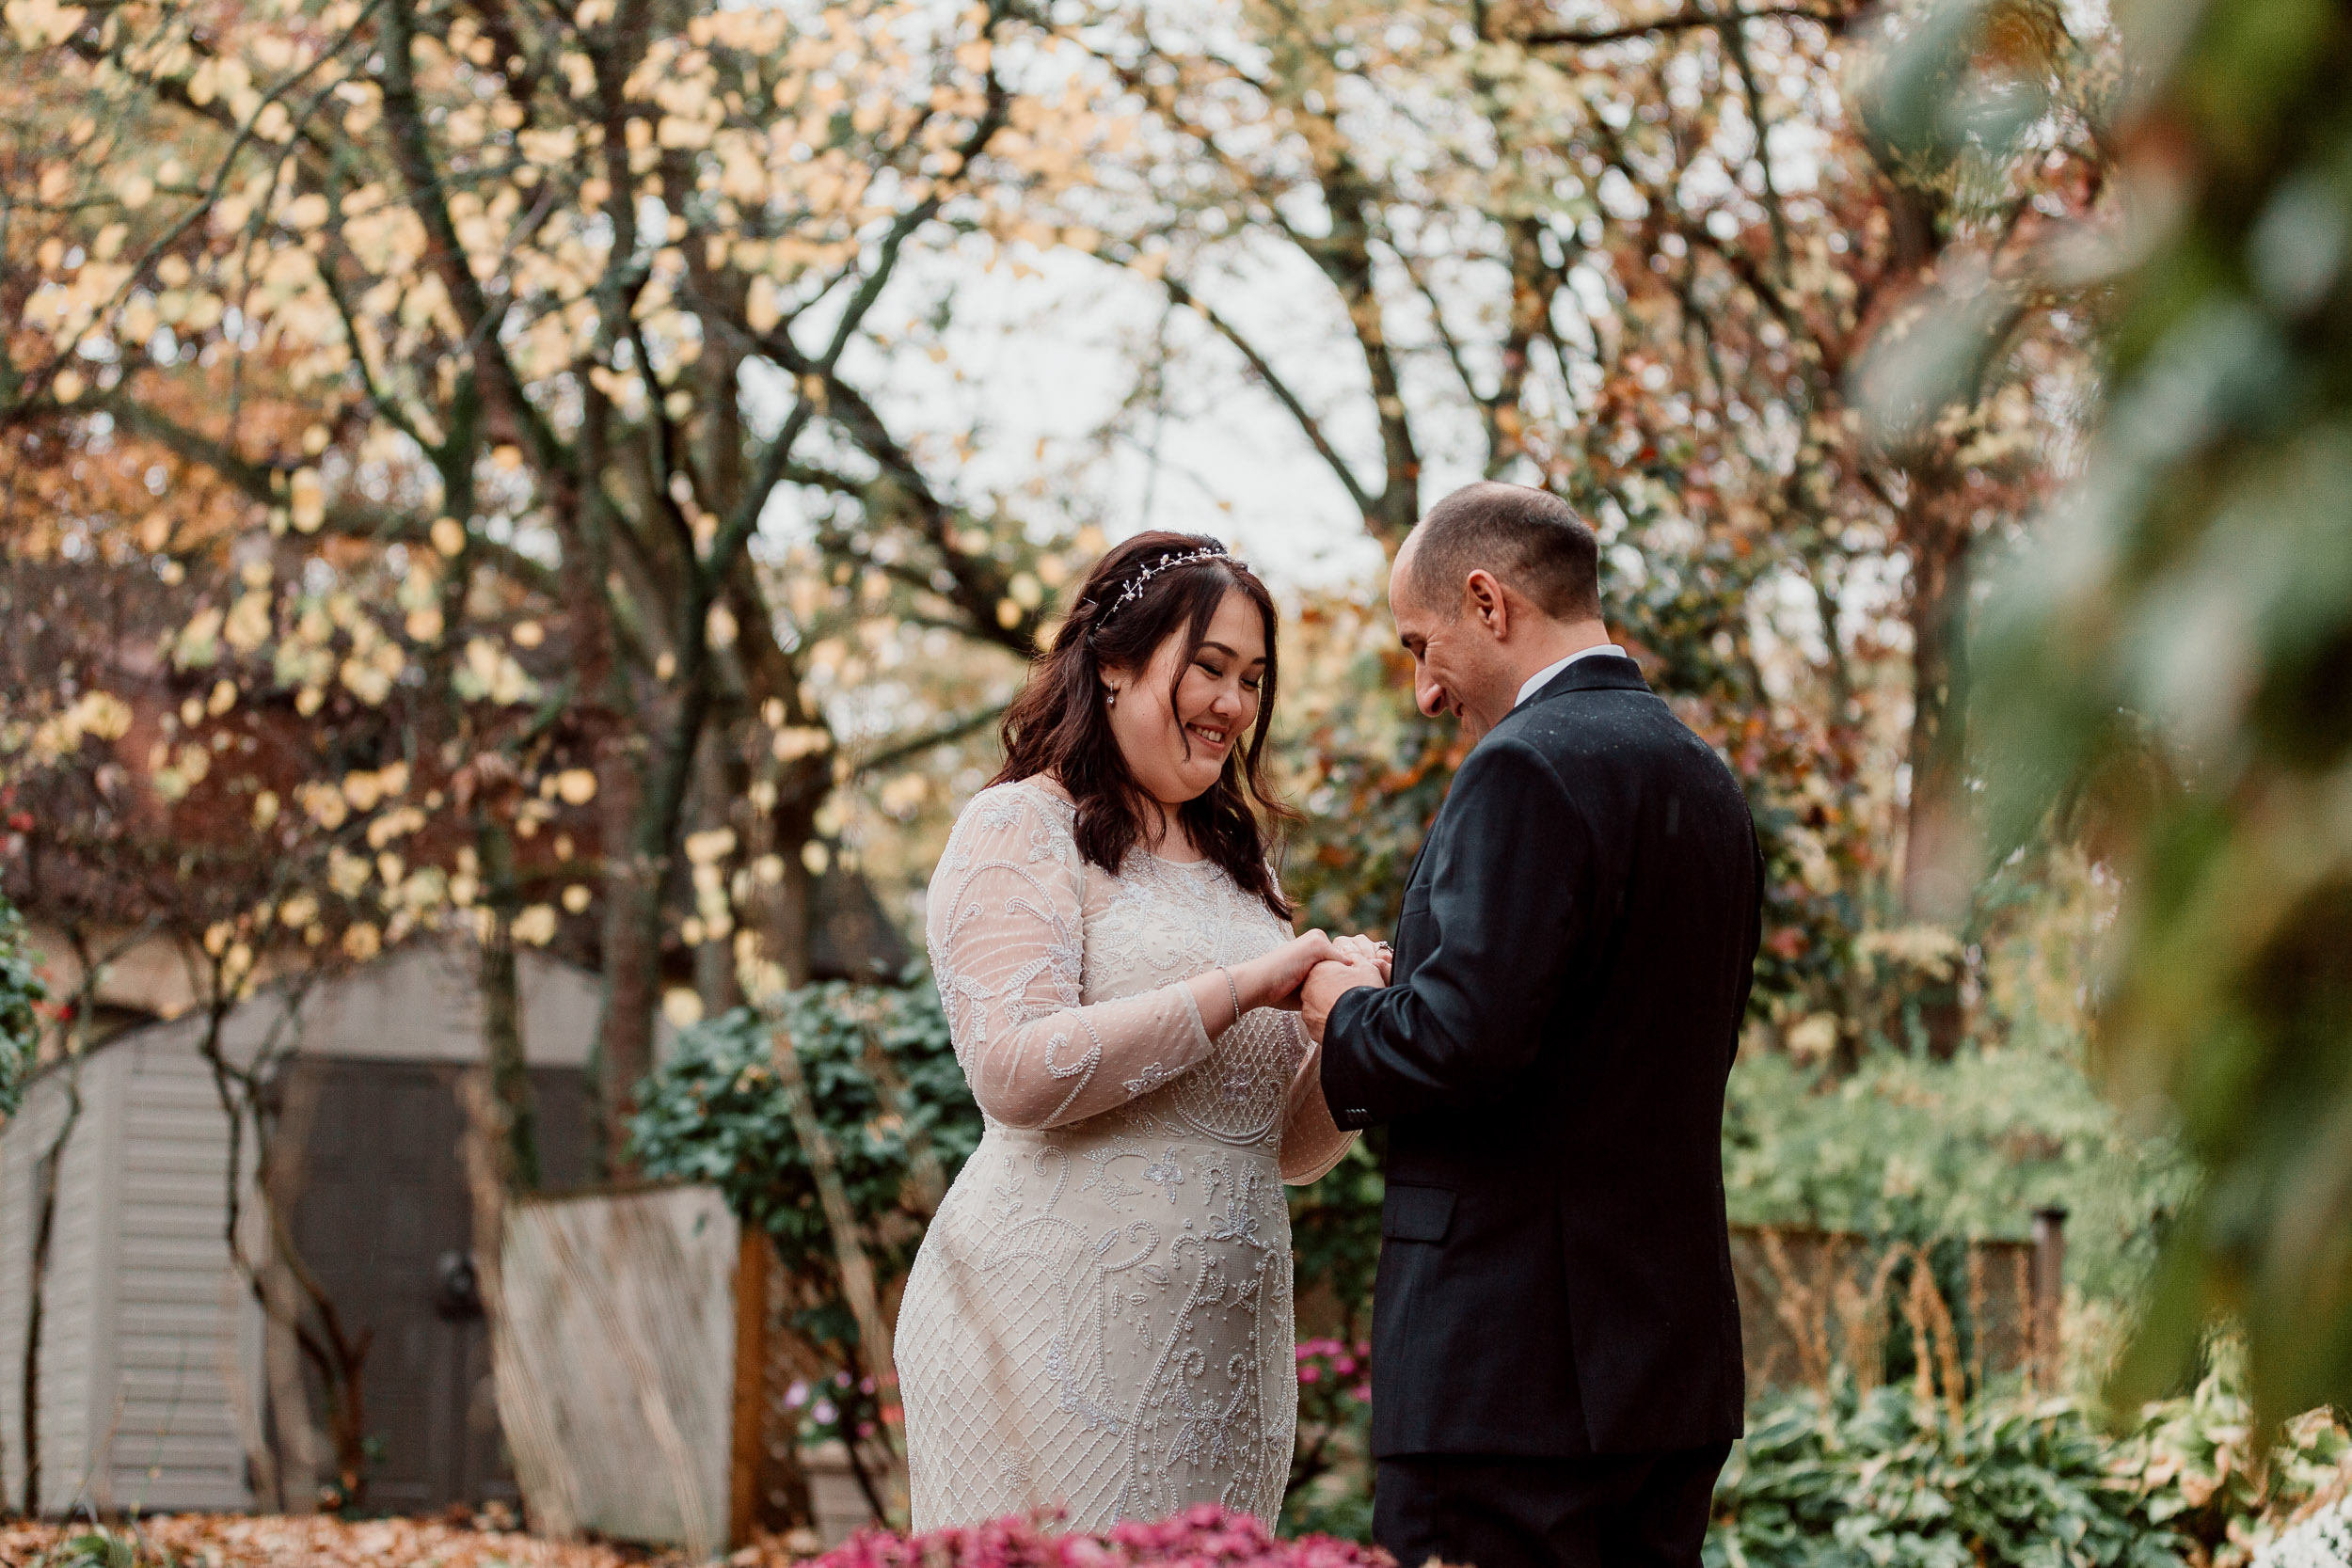 Park wedding photo ideas | 
Intimate Elopement in Palos Park IL | The Wayside Chapel at The Center Wedding | The Center Garden Wedding | Rainy Fall Wedding | Fall Chicago Wedding | Elopement Photographer Chicago